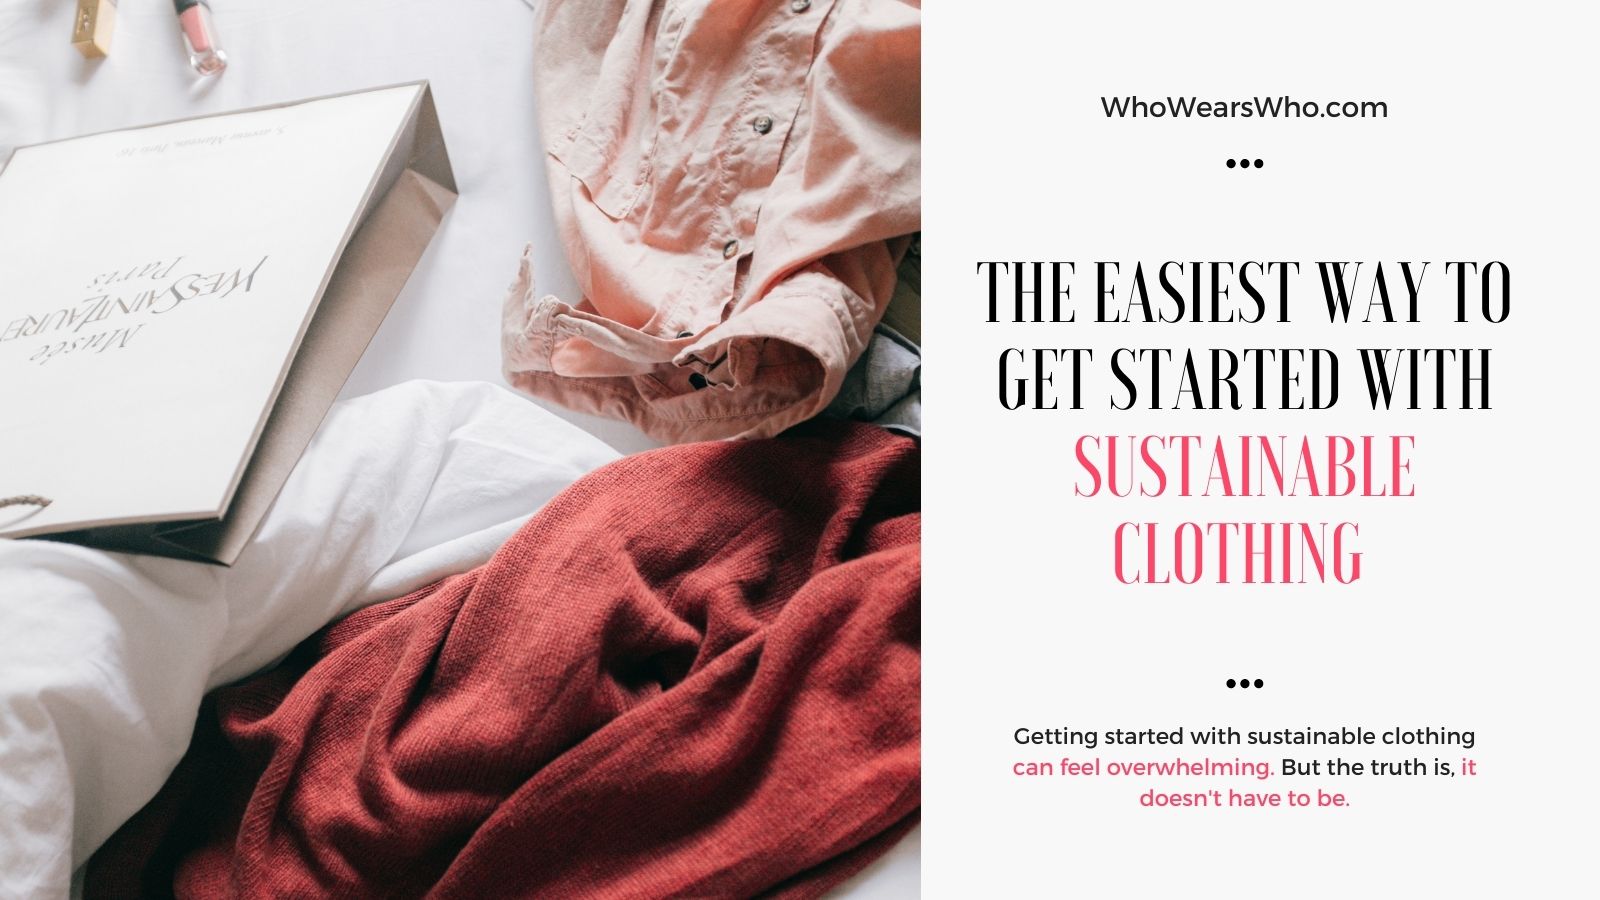 The easiest way to get started with sustainable clothing Twitter